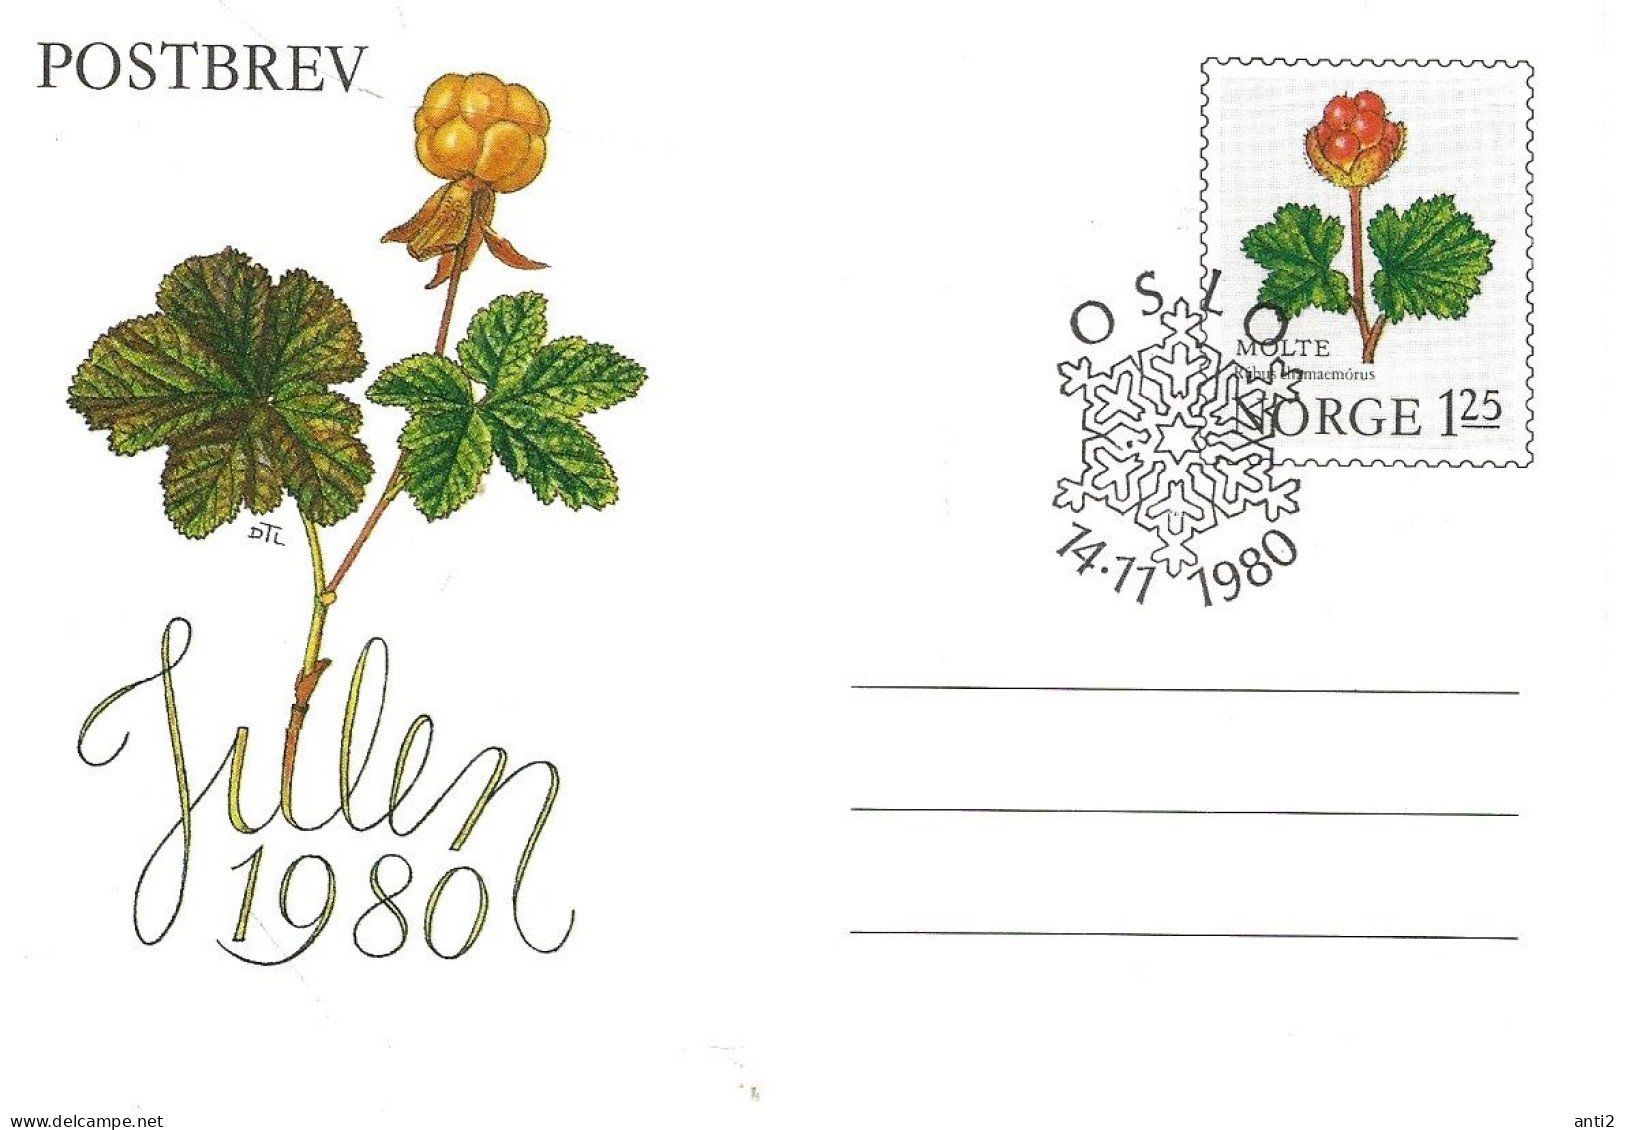 Norge Norway 1980 Stationary - Postbrev, Letter With Imprinted Stamp Special For Christmas 1980 With Ripe Berries   FDC - Storia Postale